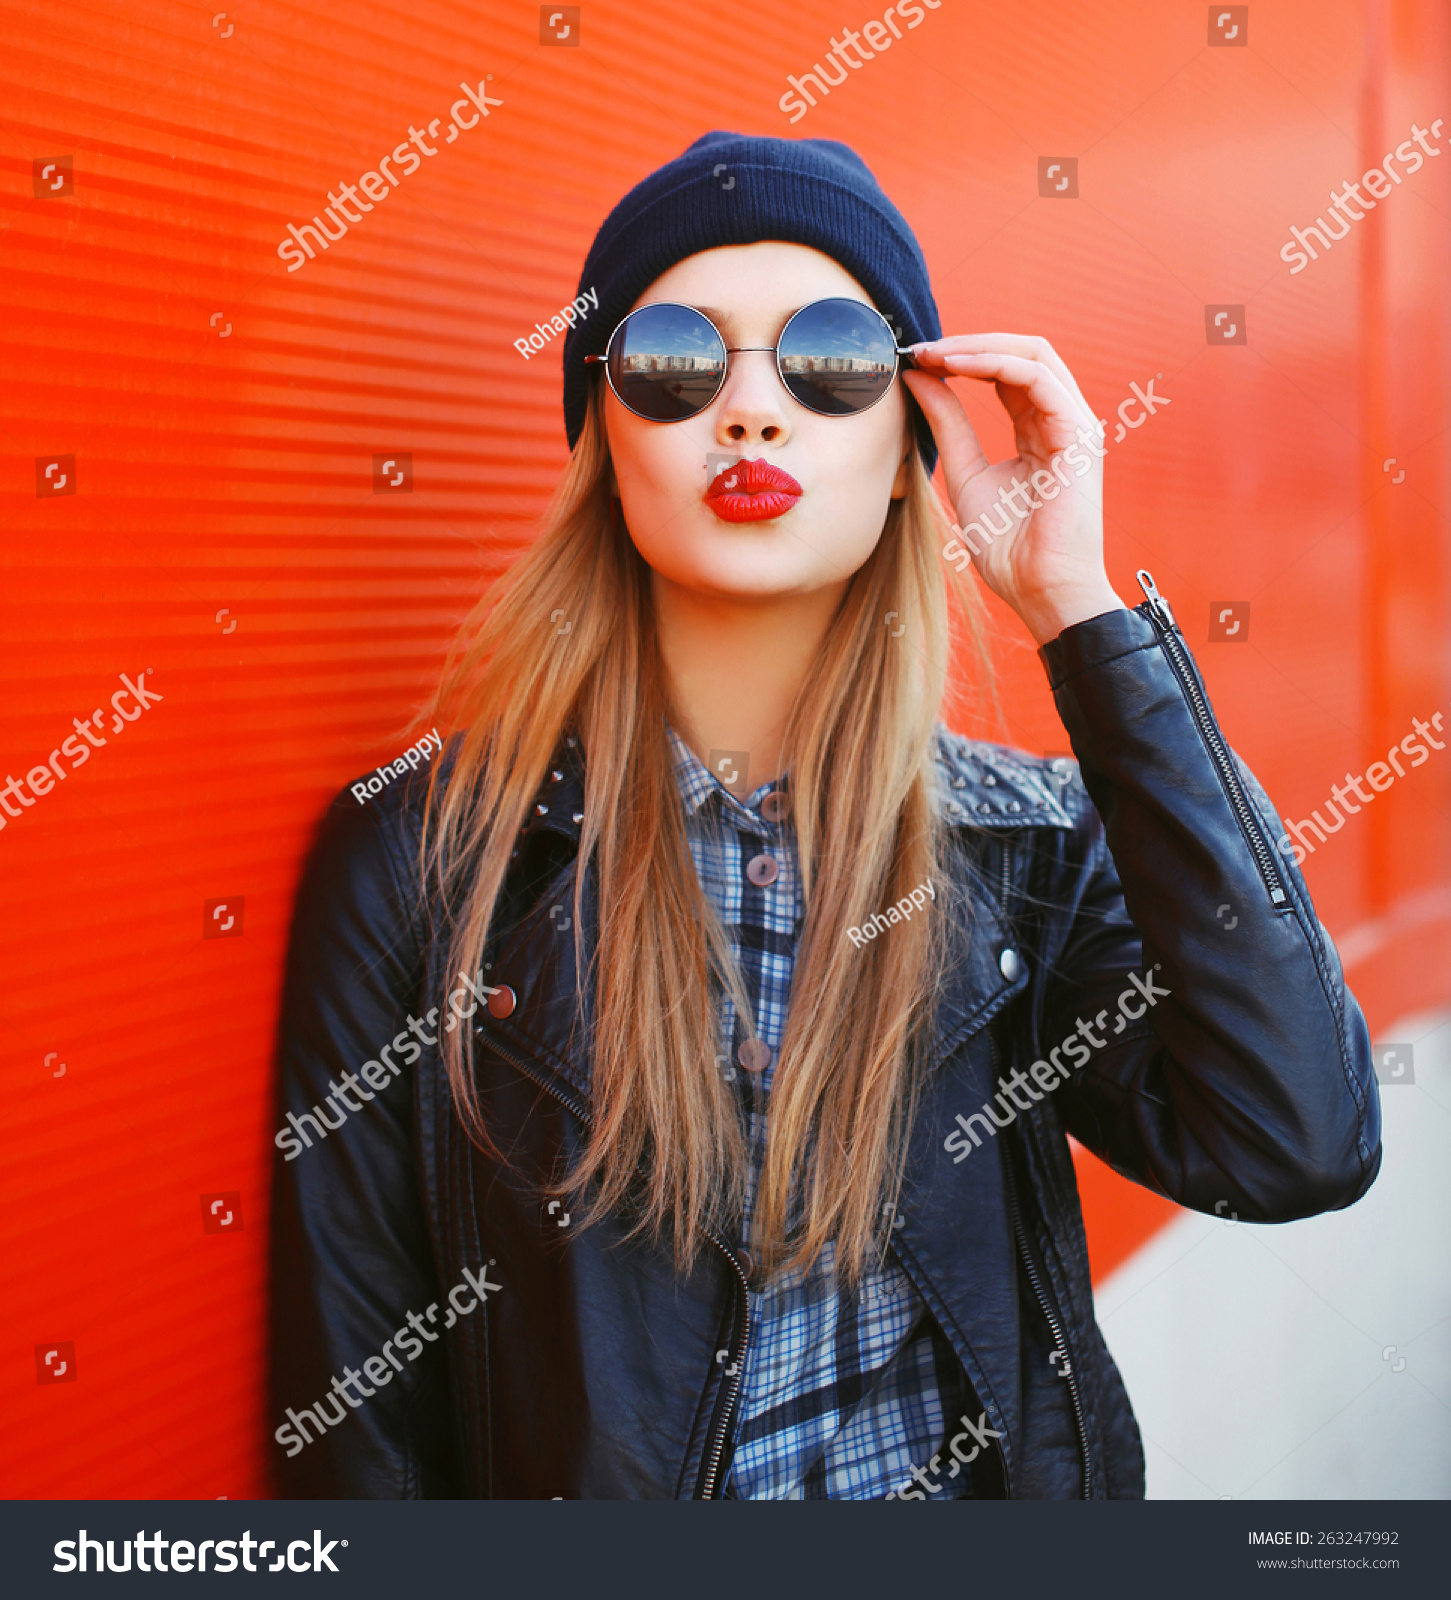 Fashionable portrait of stylish beautiful blonde young woman model blowing her lips with red lipstick sends sweet kiss in round sunglasses, black rock style leather jacket, hat on city street #263247992